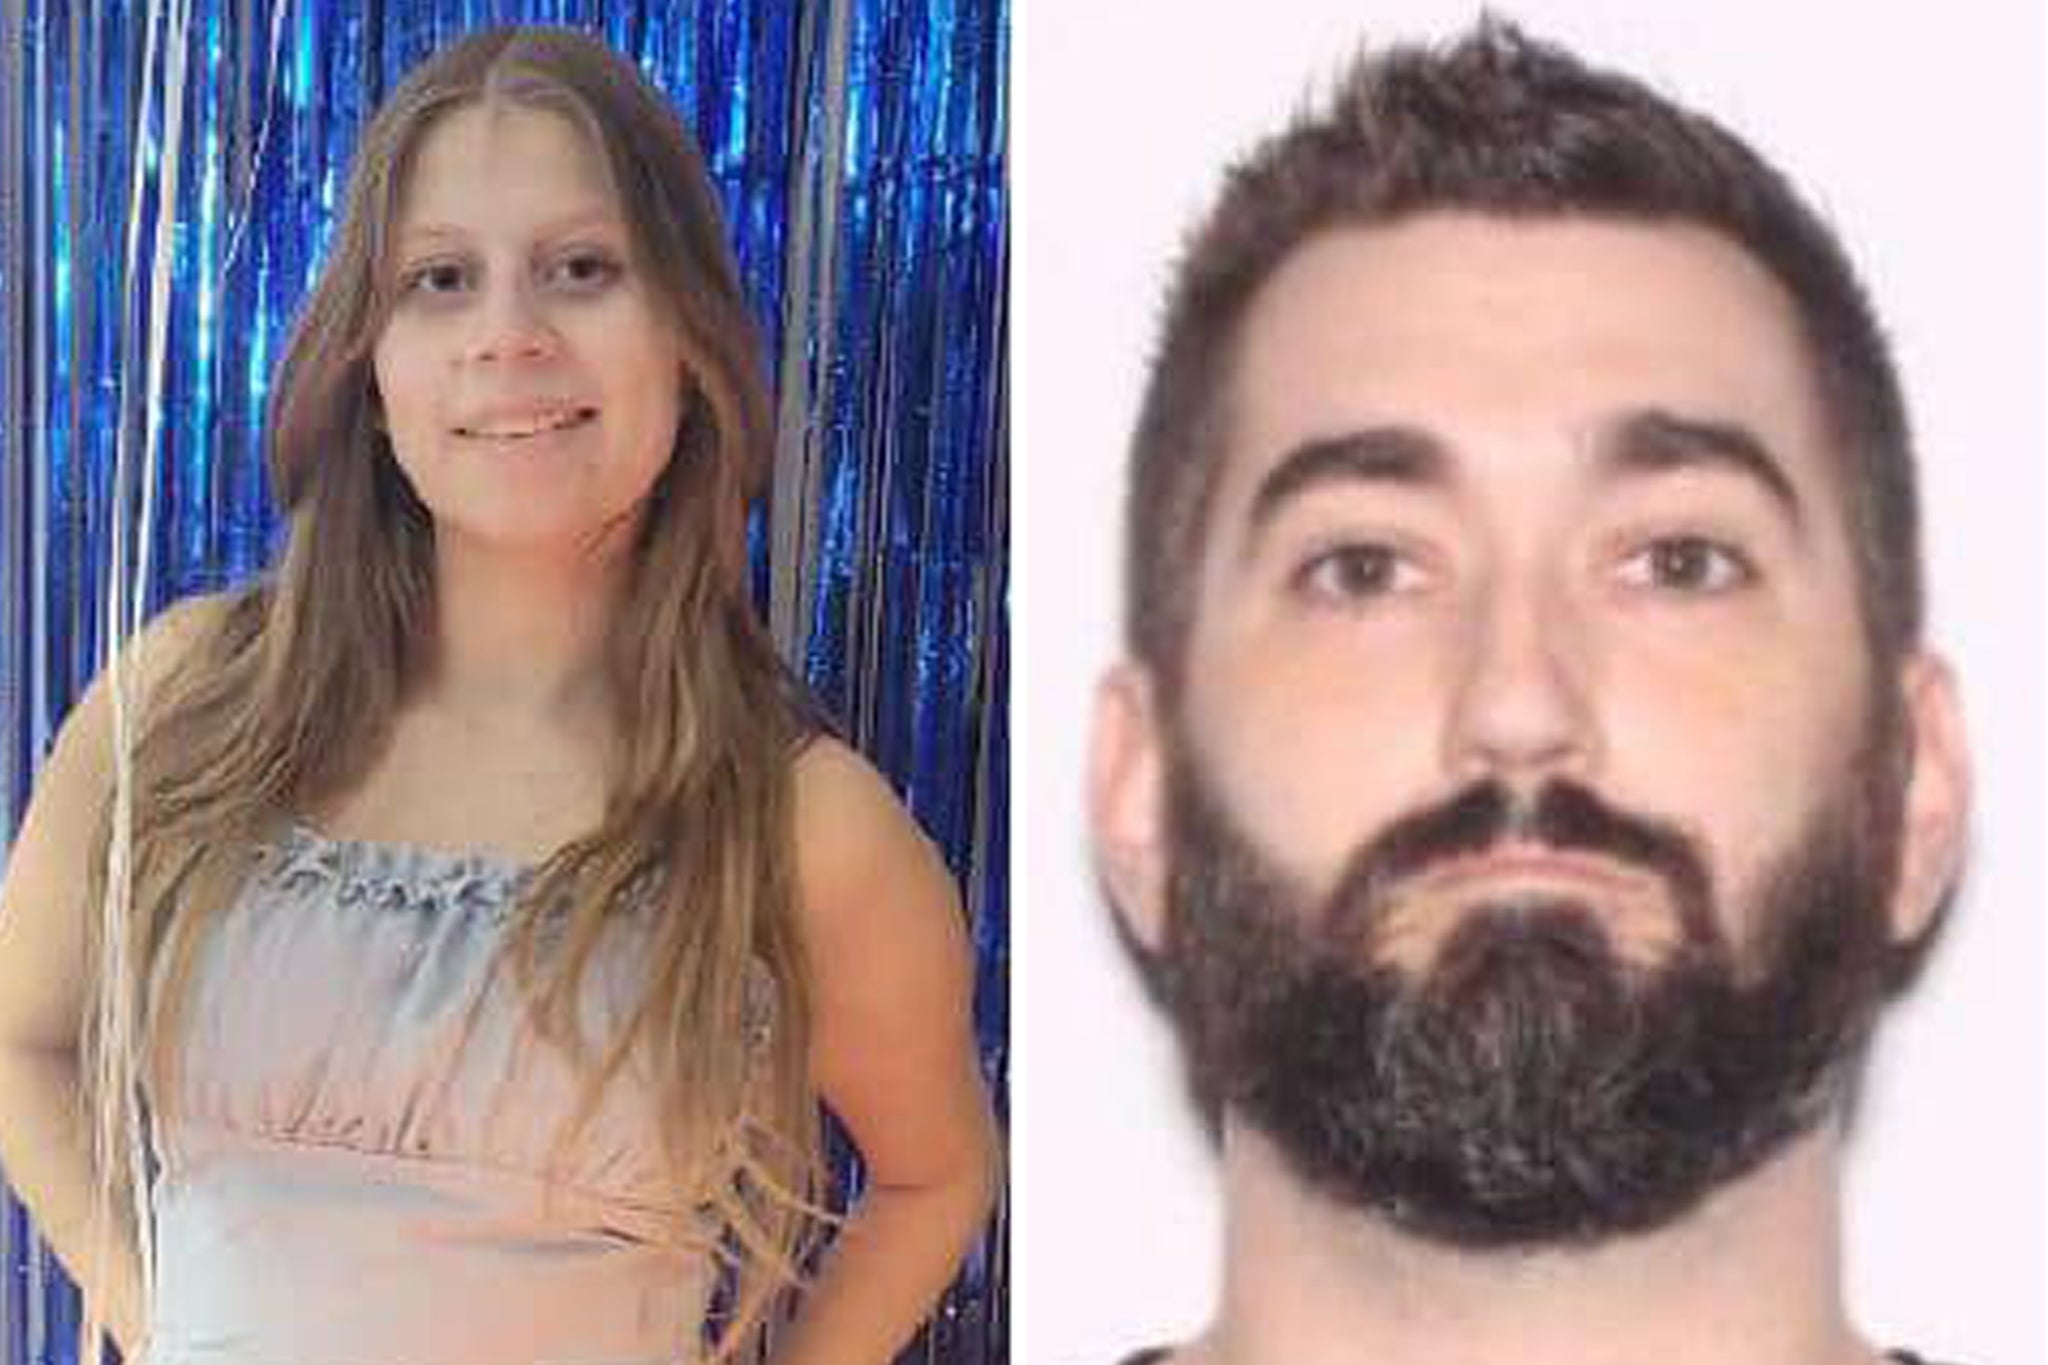 Madeline Soto, 13, disappeared on 26 February in Kissimmee, Florida. Her mother’s boyfriend Stephan Sterns (right) is the lead suspect